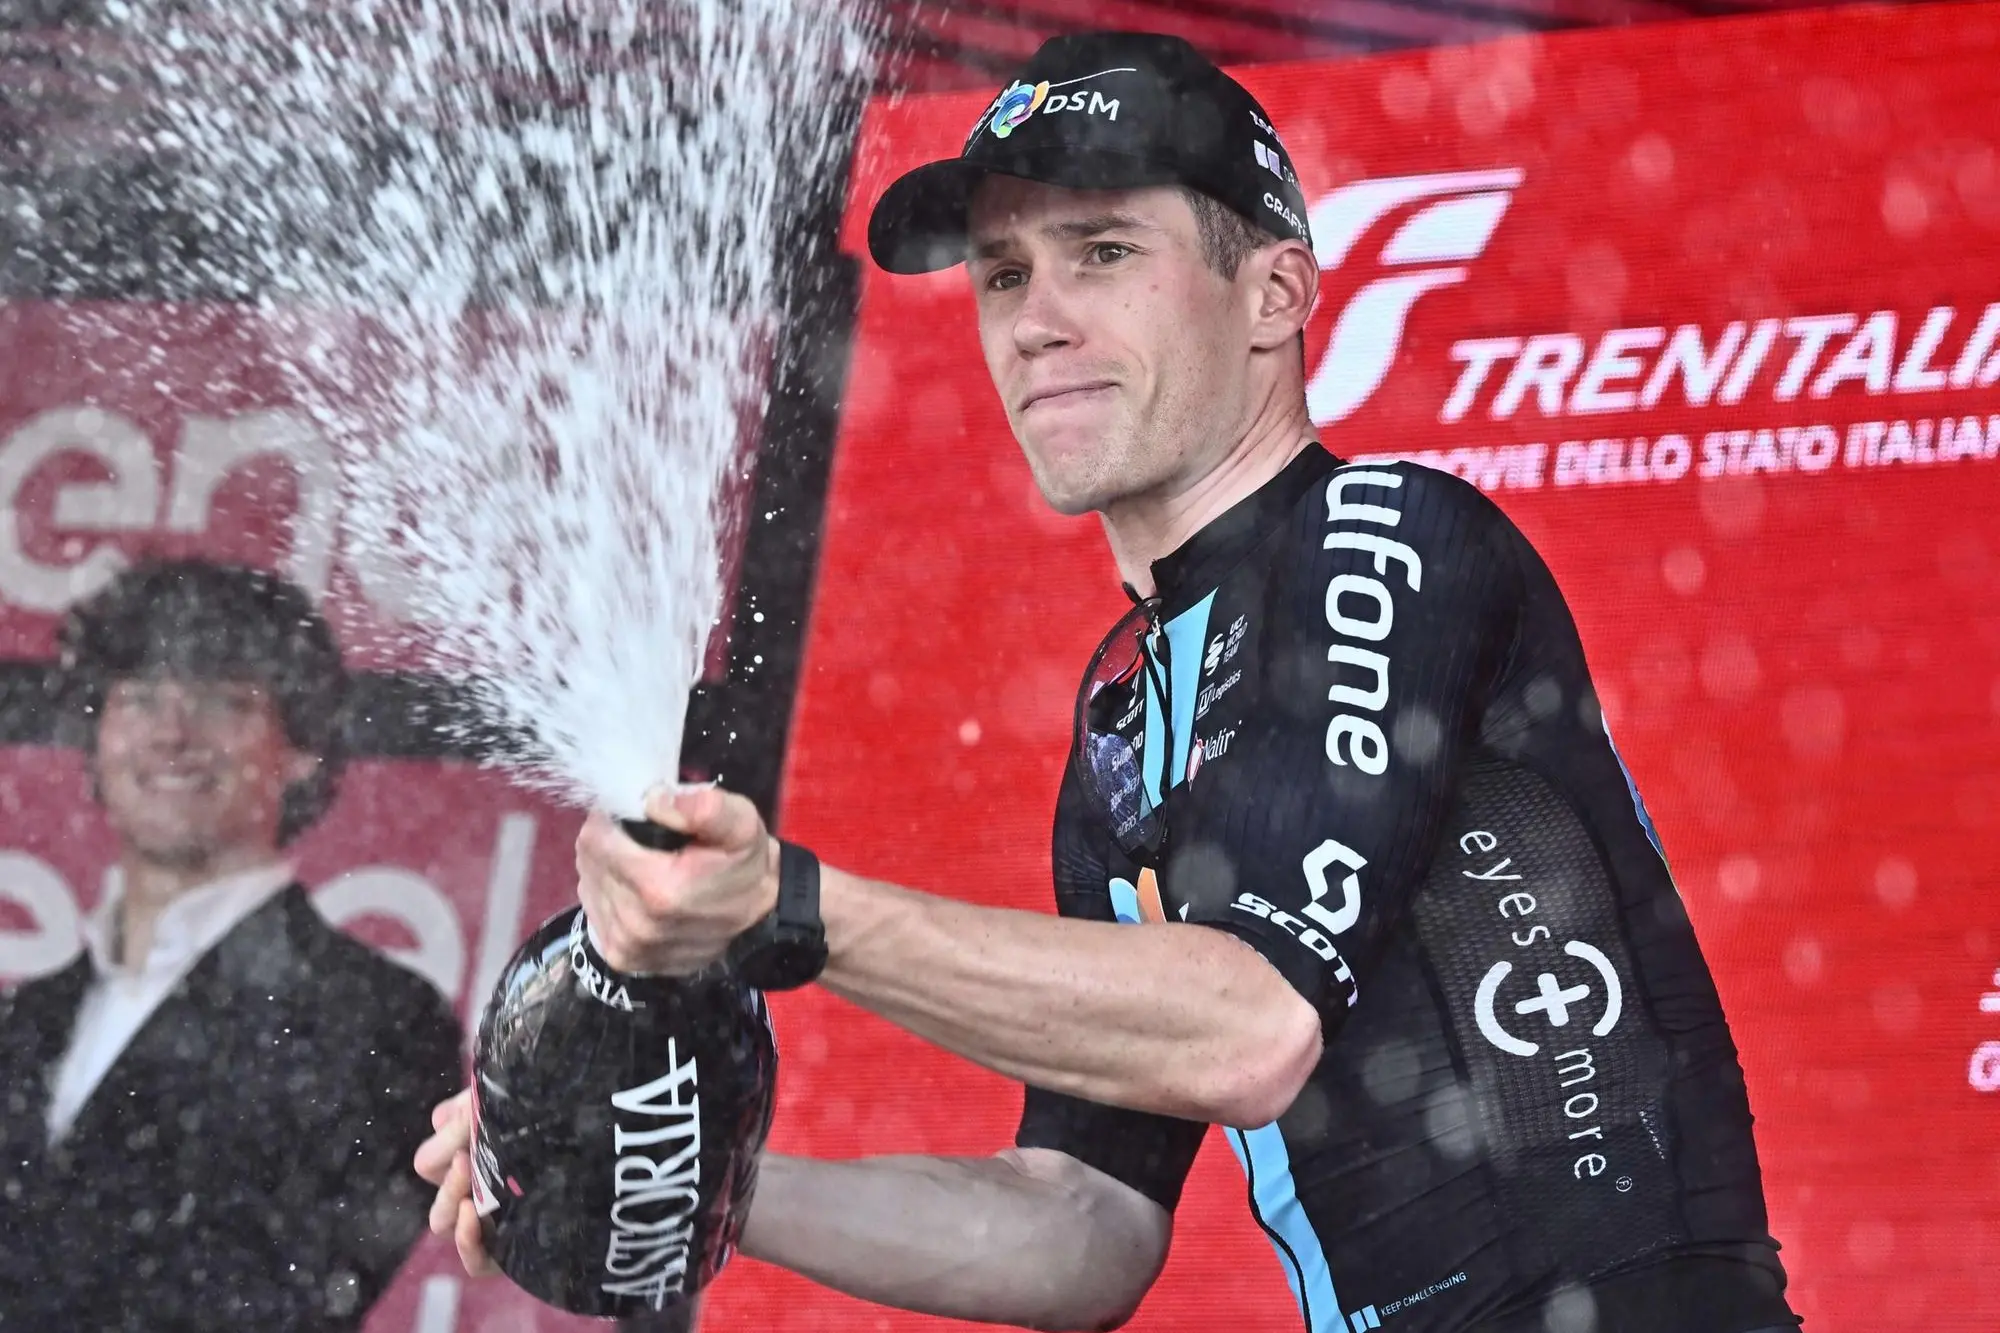 Italian rider Alberto Dainese of Dsm Team celebrates on the podium after winning the seventeenth stage of the 2023 Giro d'Italia cycling race over 197 km from Pergine Valsugana to Caorle, Italy, 24 May 2023. ANSA/LUCA